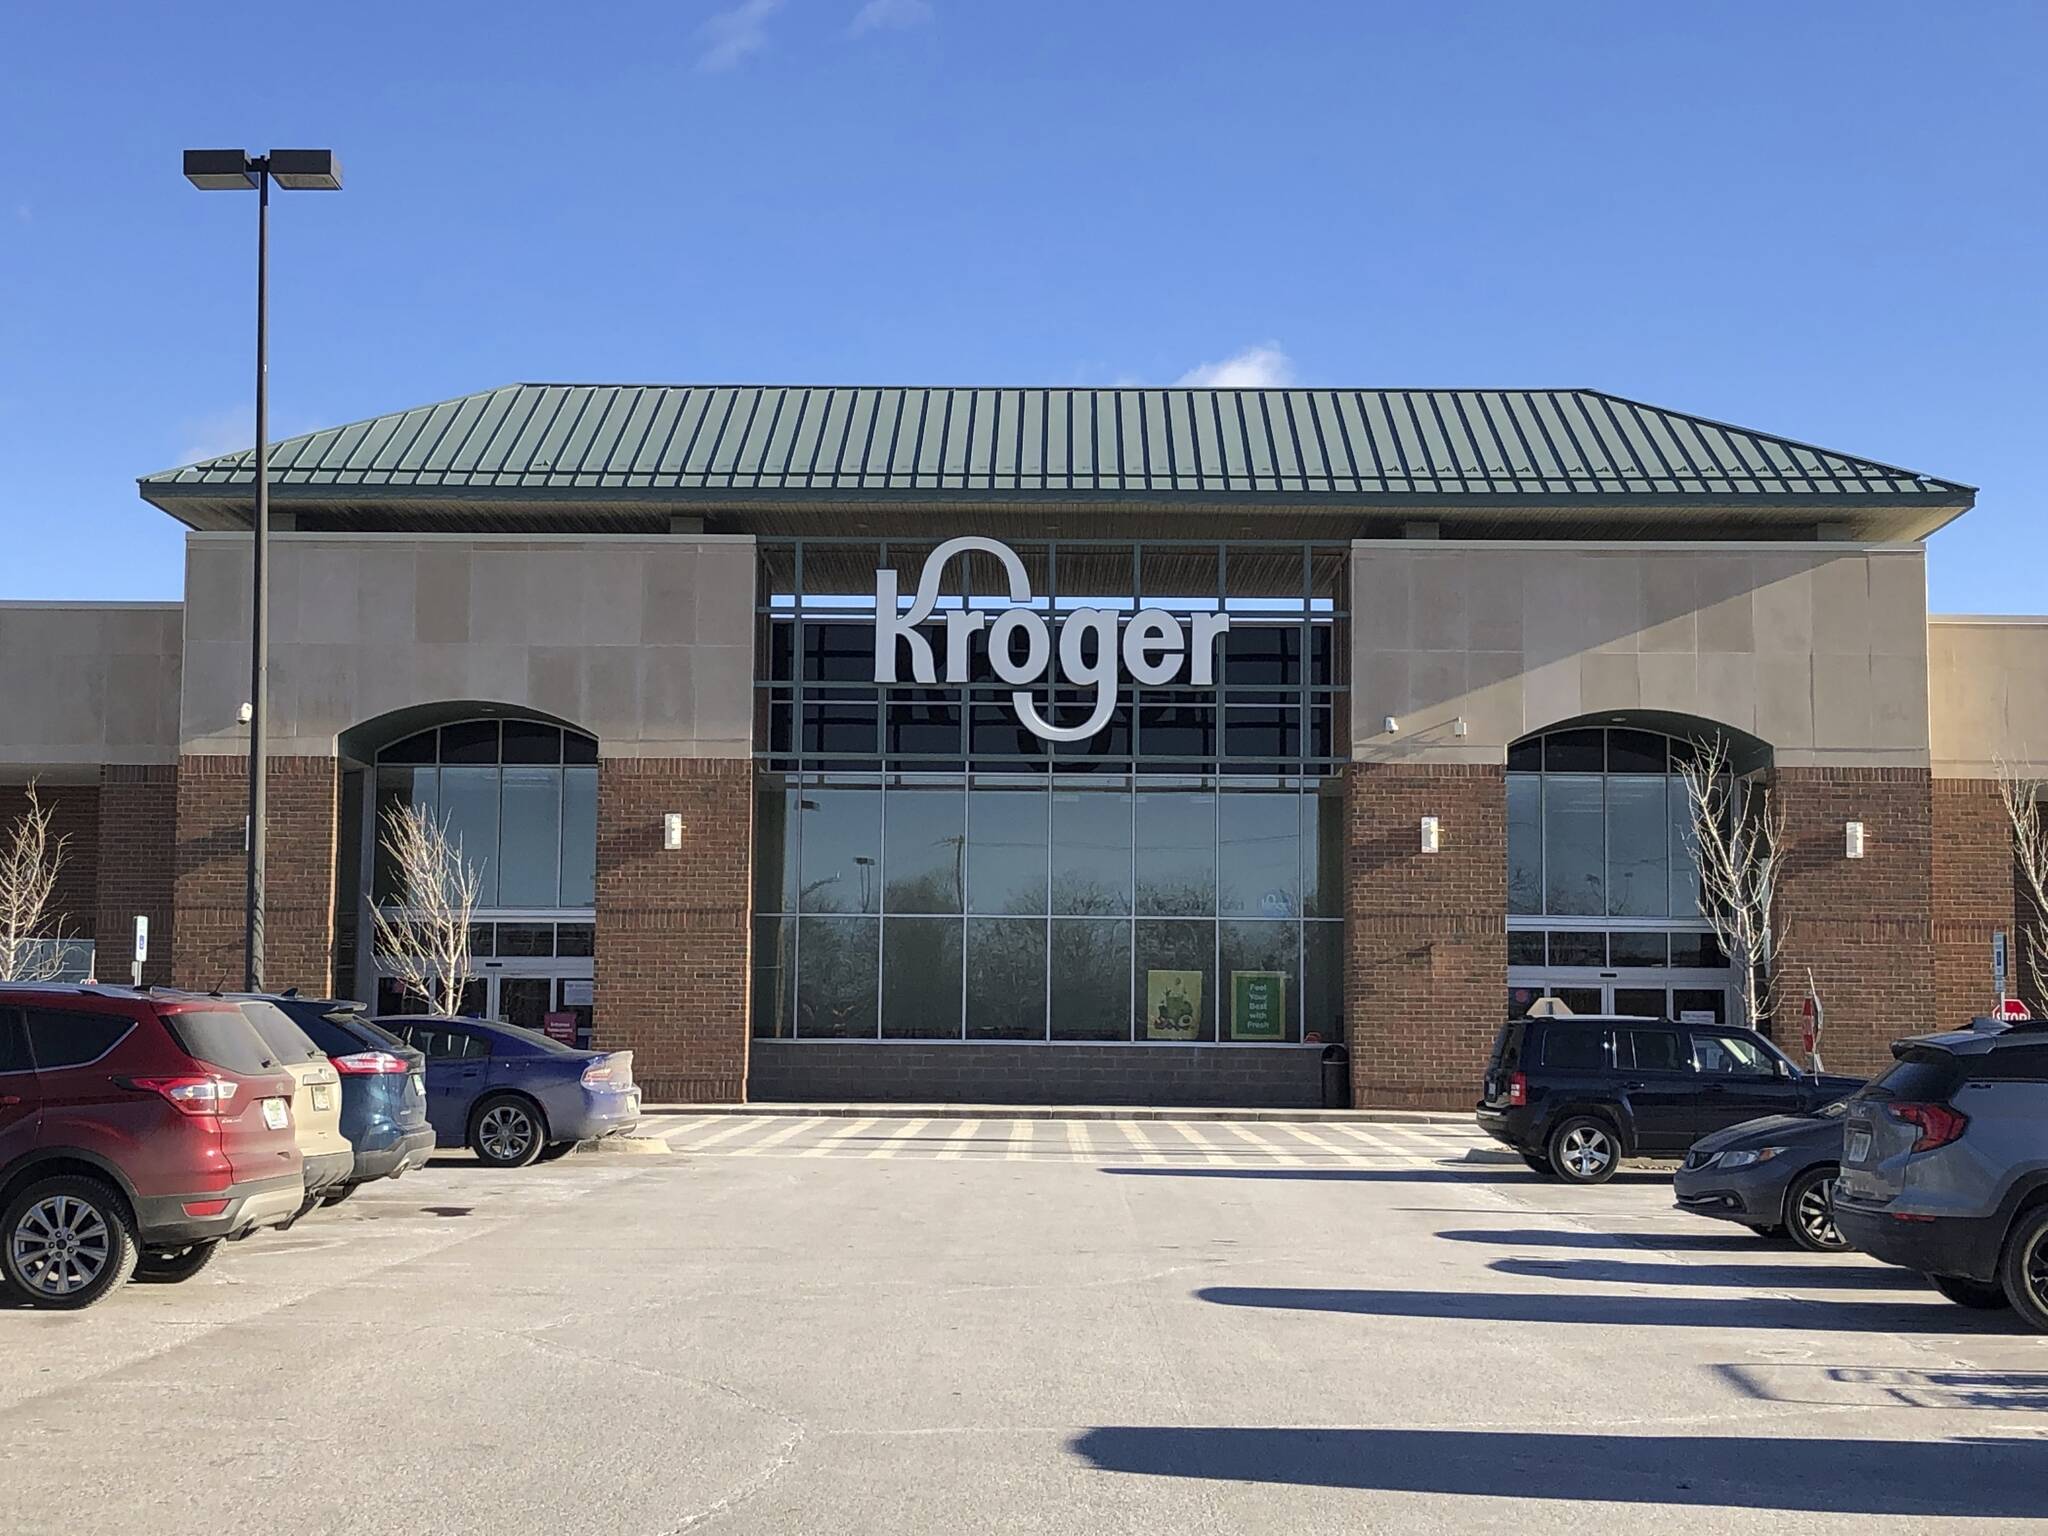 FILE - Exterior of the Kroger grocery store in Novi, Mich., is seen Saturday, Jan. 23, 2021.  Two of the nation's largest grocers are planning to merge. Kroger said Friday, Oct. 14, 2022, it has agreed to acquire Albertsons in a $20 billion deal.  (Ed Pevos / Ann Arbor News)